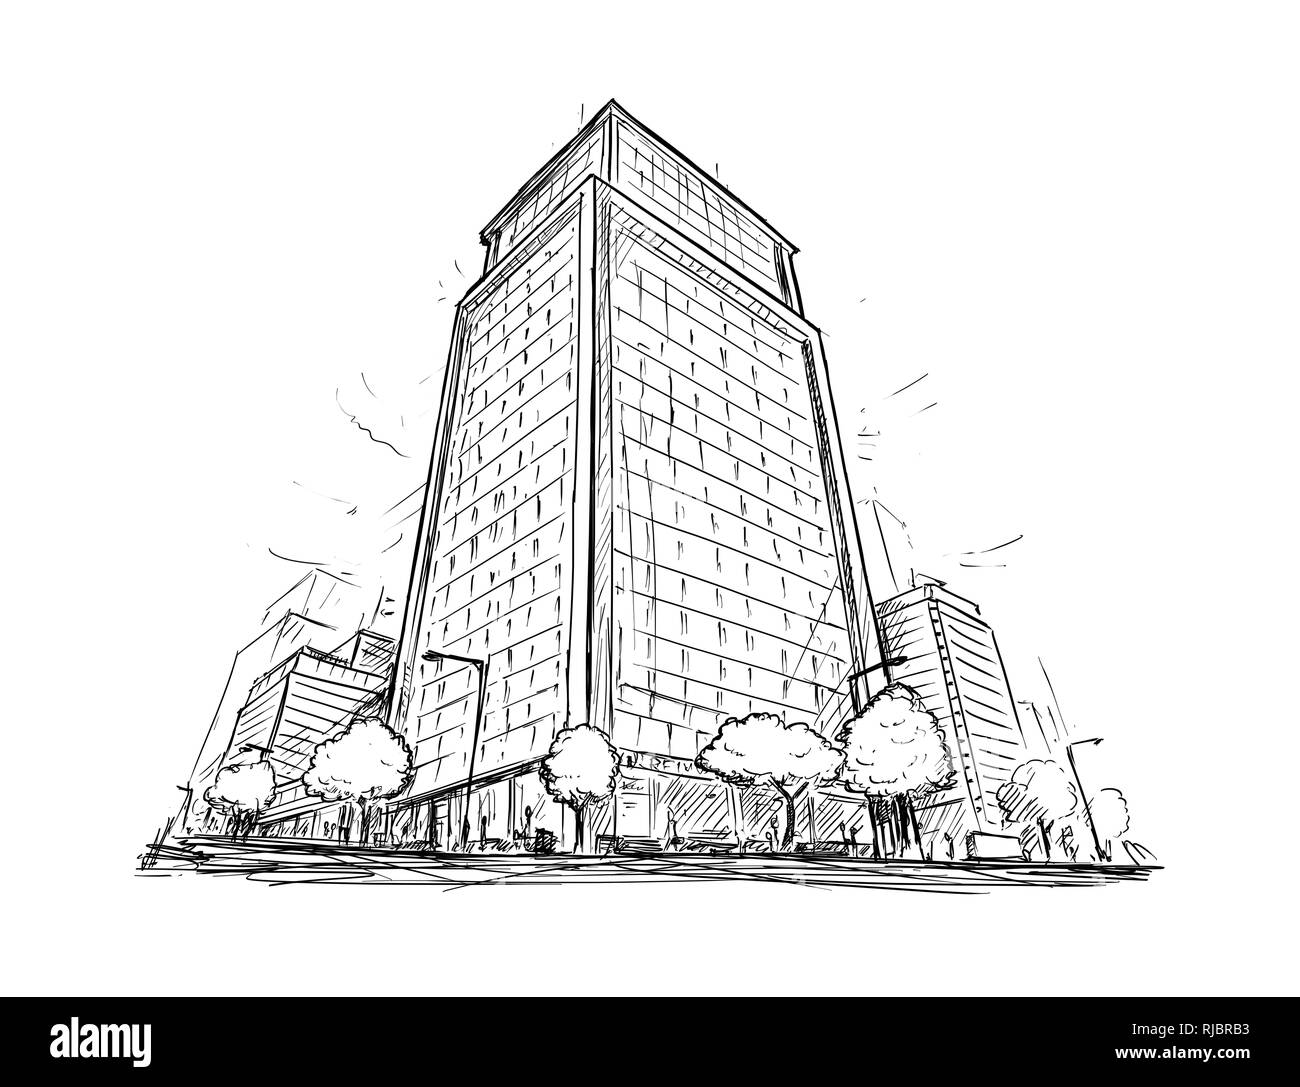 Drawing of City Street High Rise Building Stock Photo